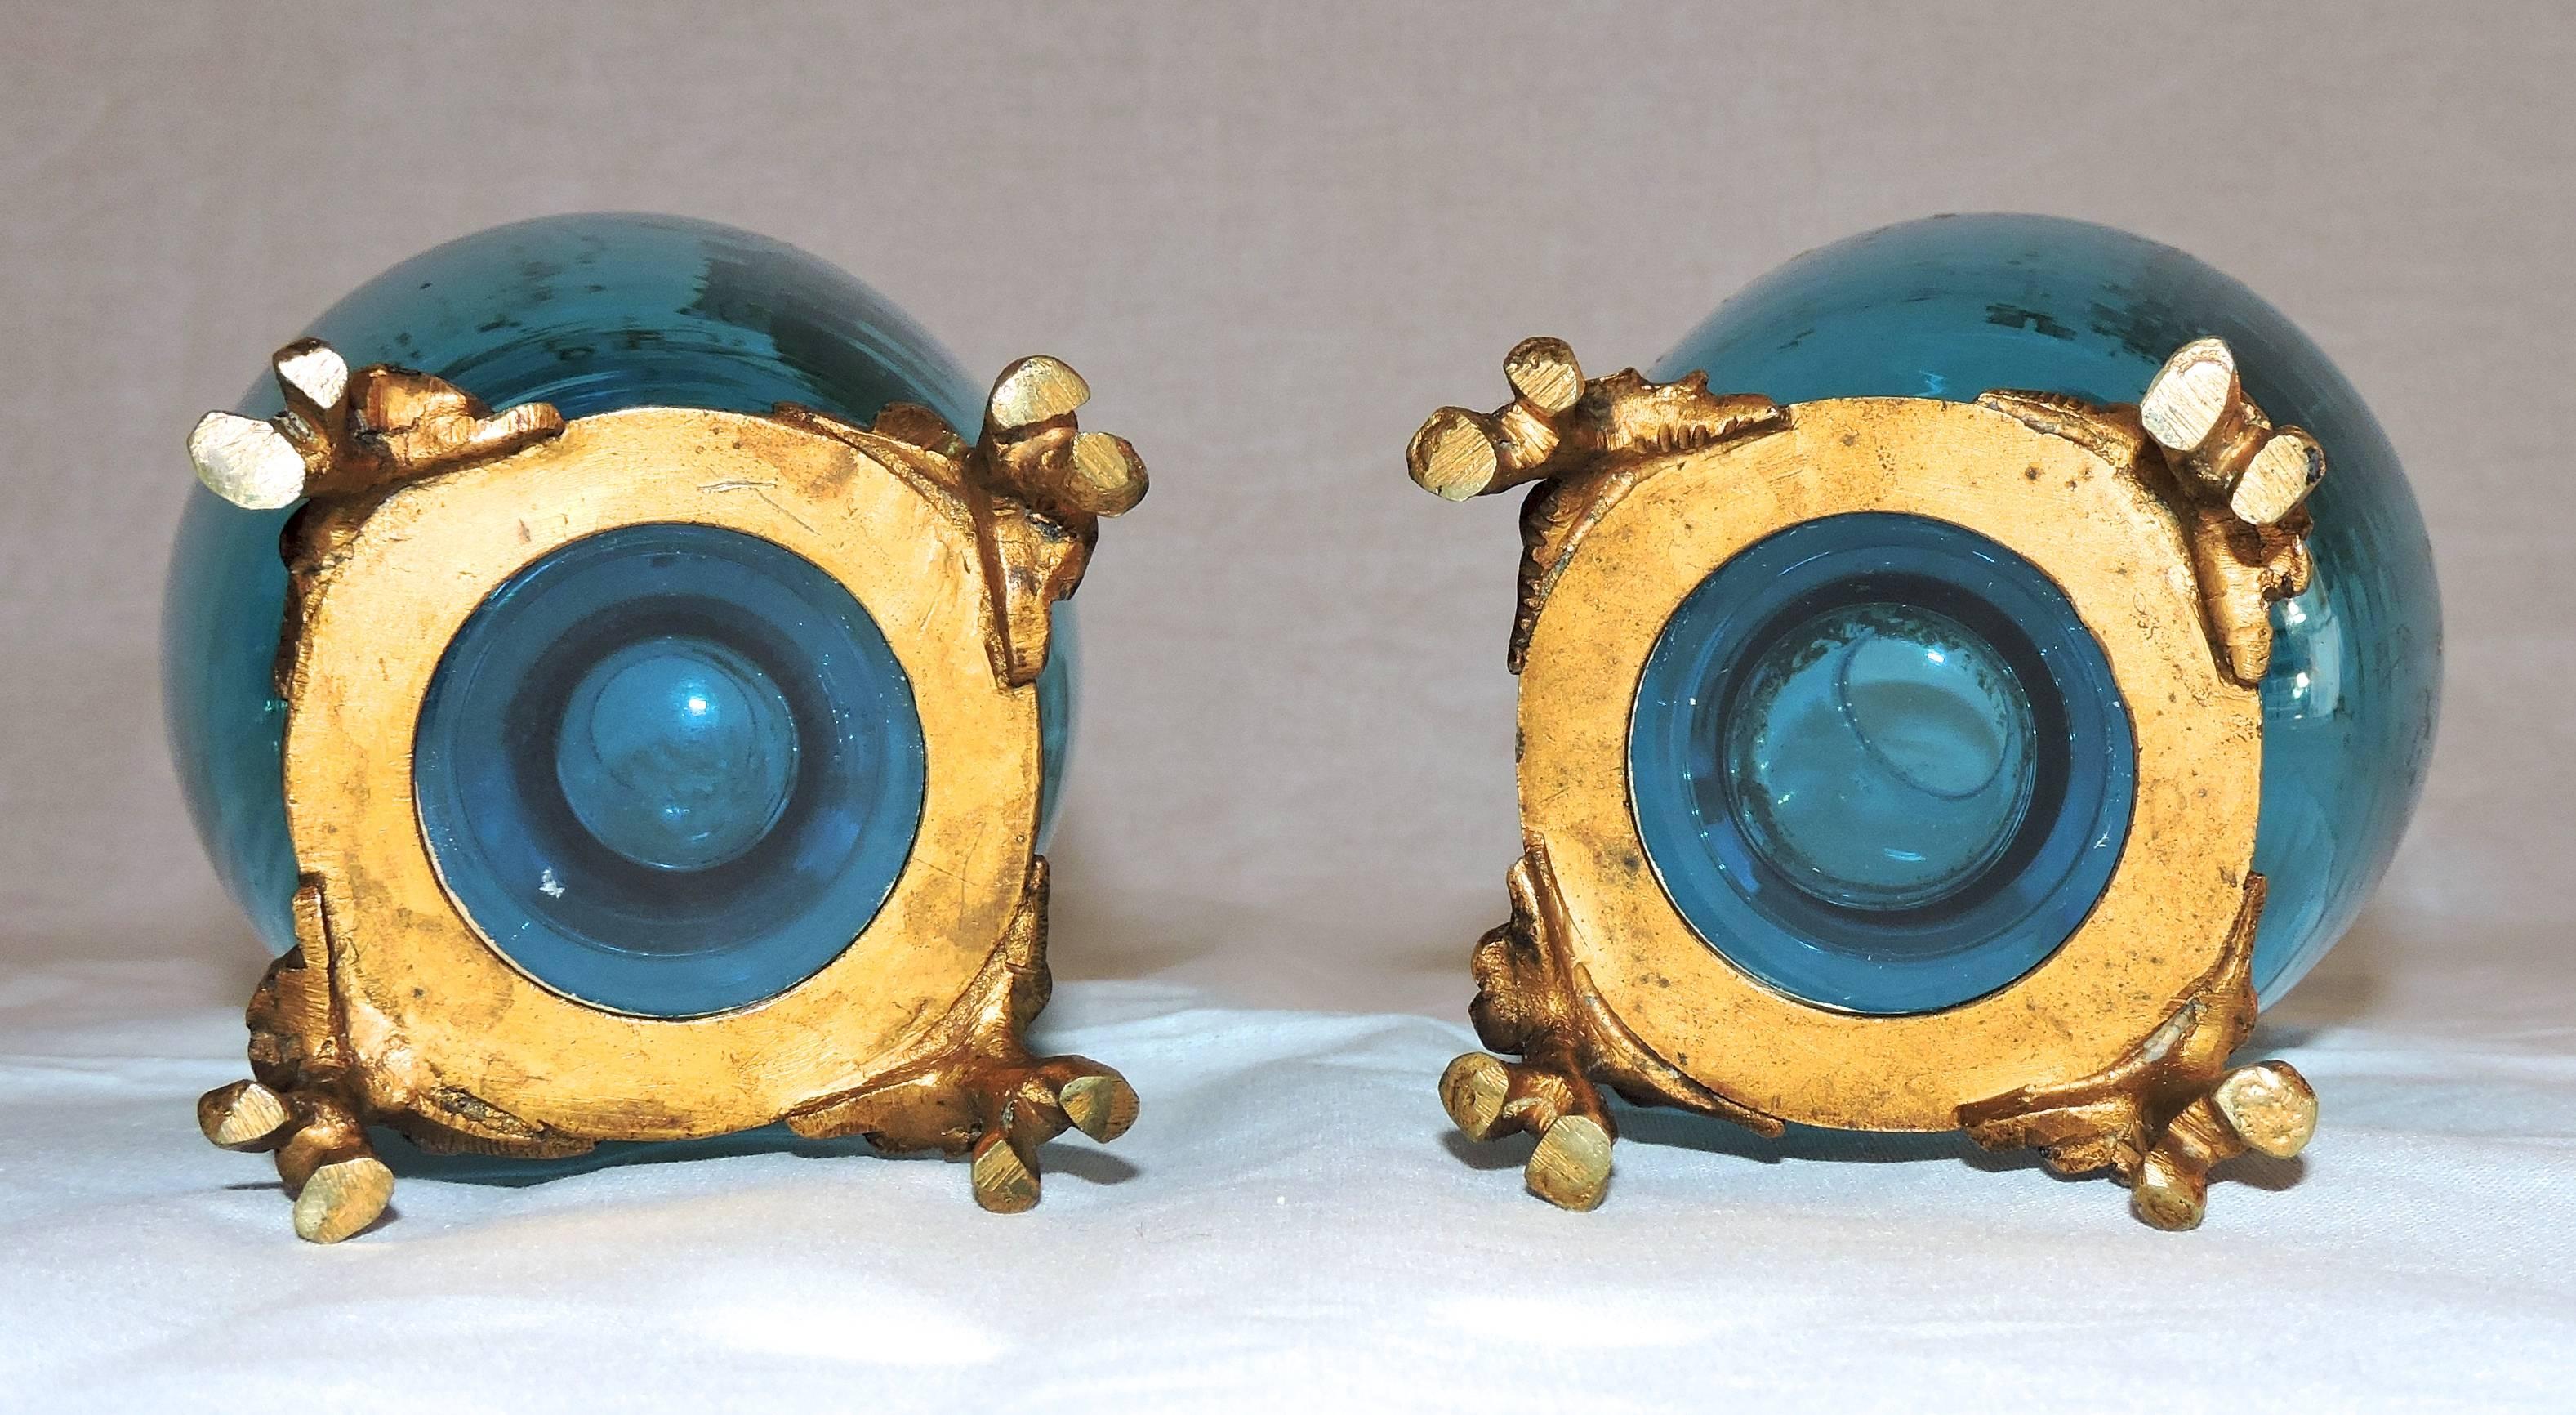 Pair of French Japonisme Blue Crystal Enamel Vases Attributed to Baccarat 1